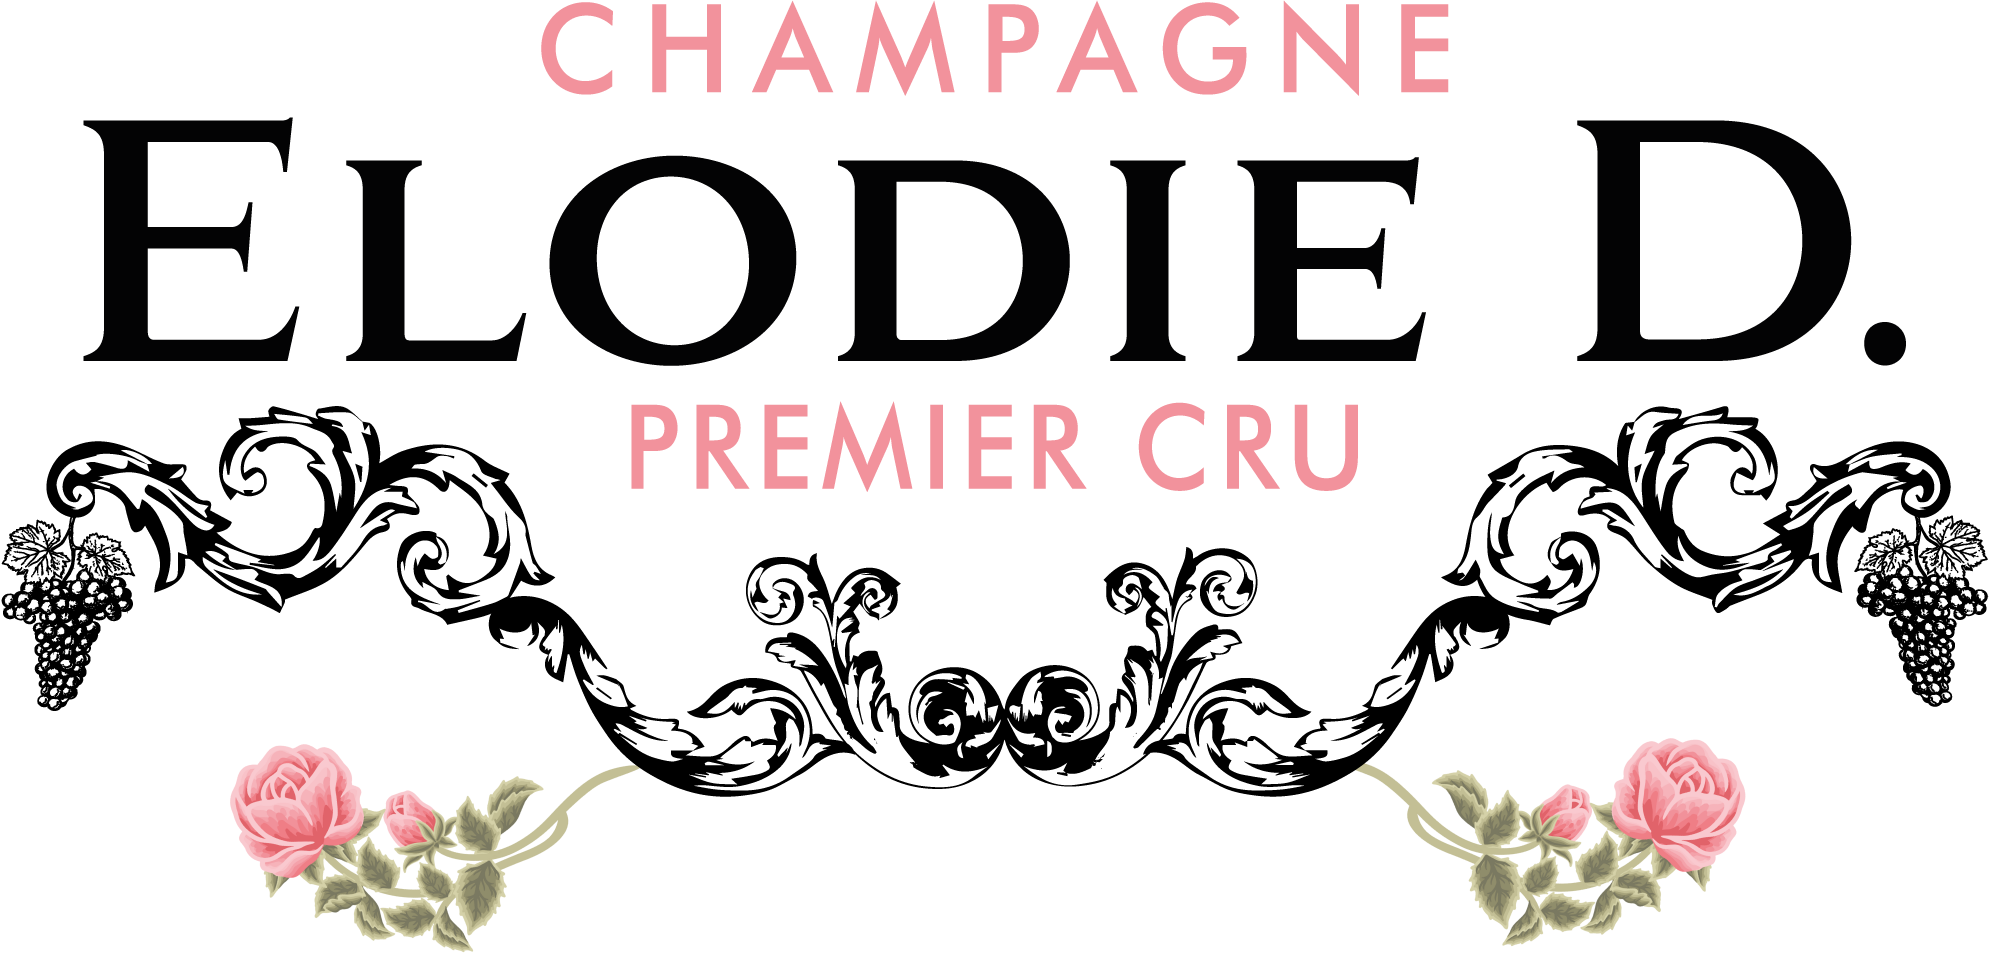 Champagne Elodie D.